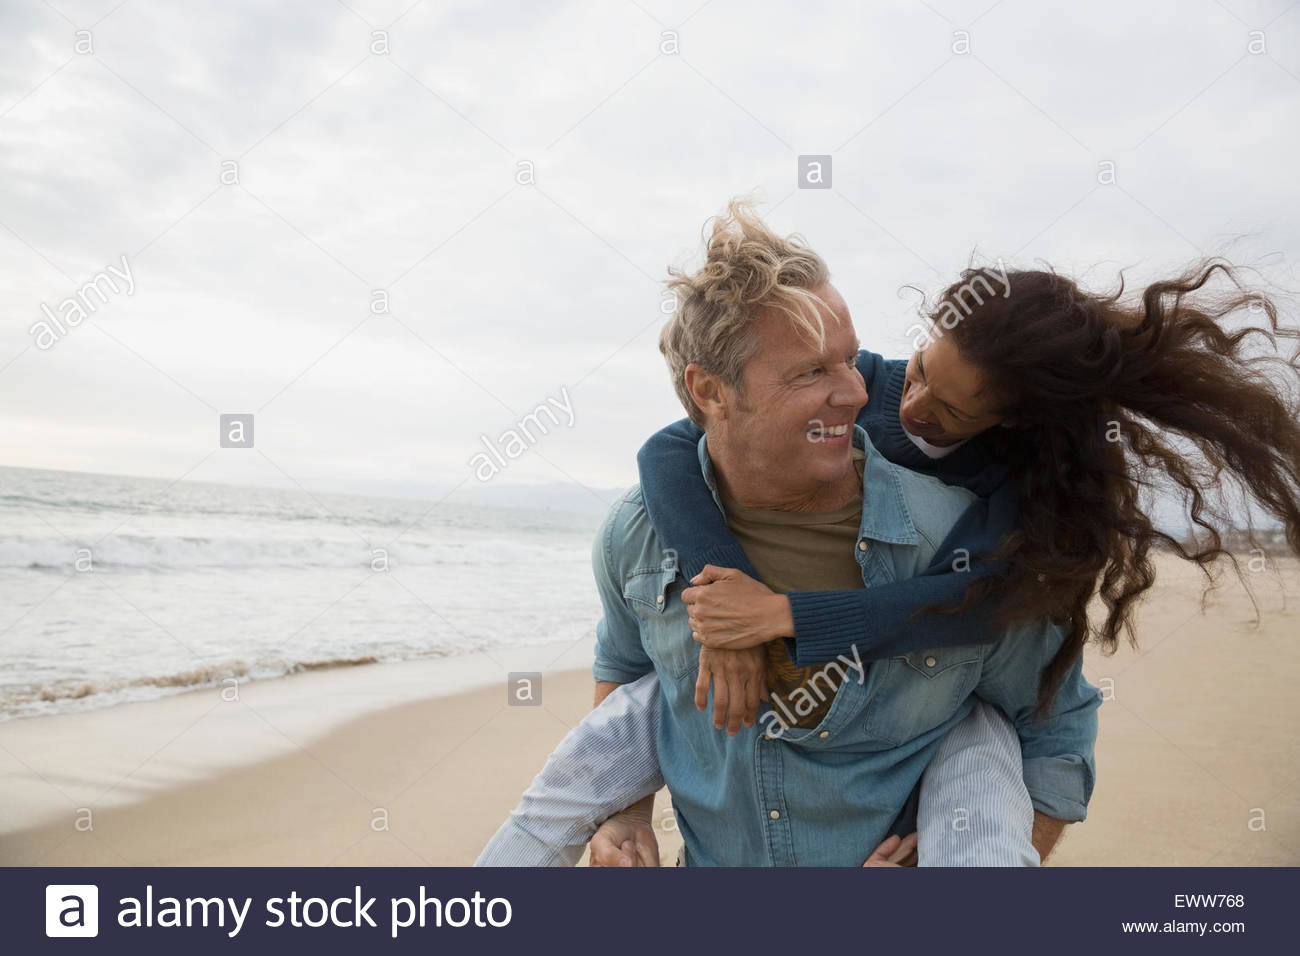 Playful couple piggybacking on beach Banque D'Images